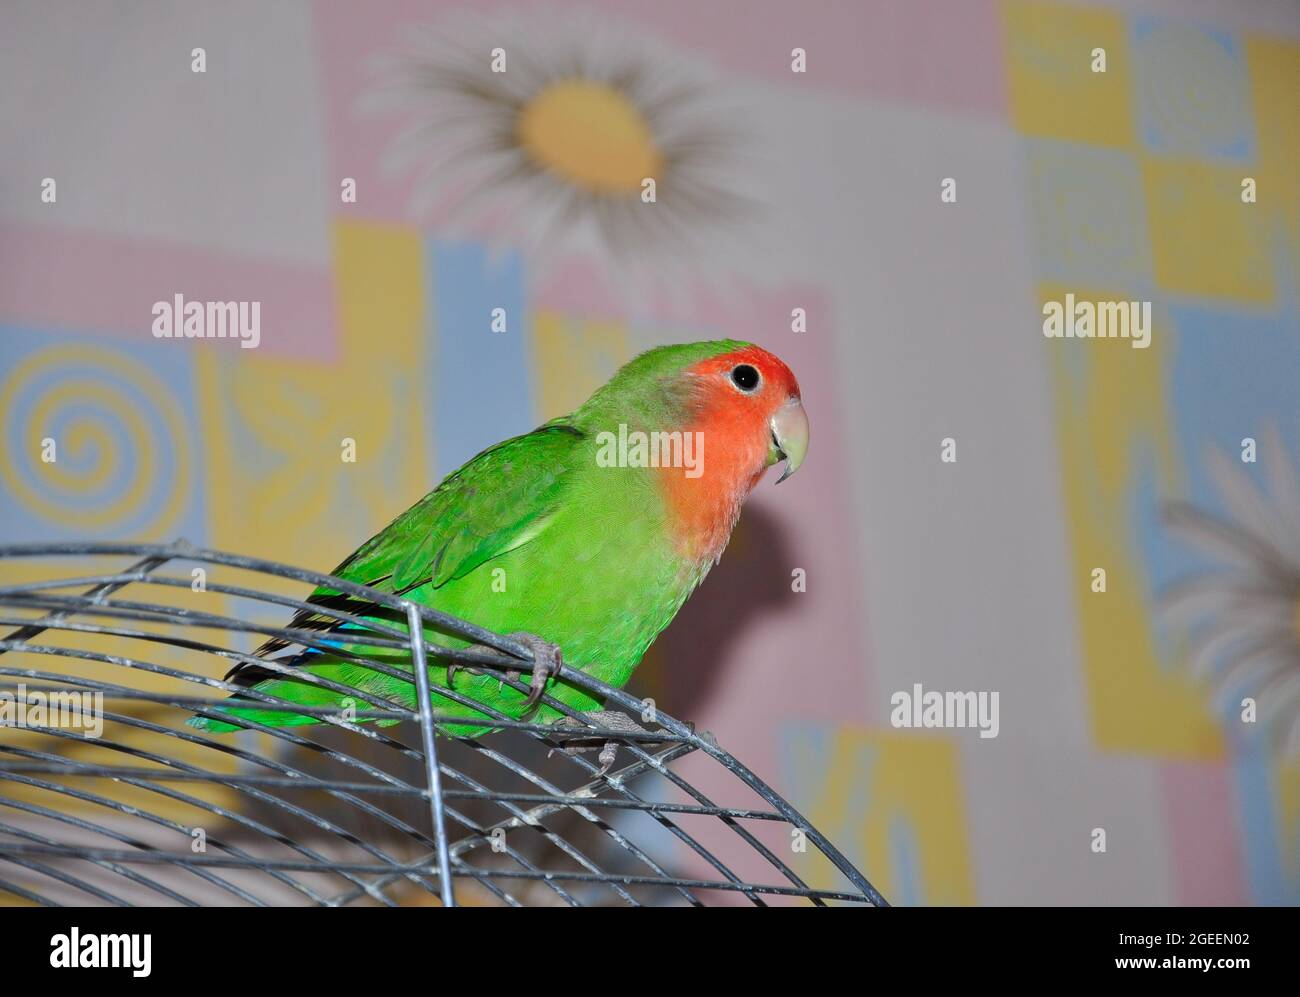 lovebird parrot Agapornis sits on a cage Stock Photo